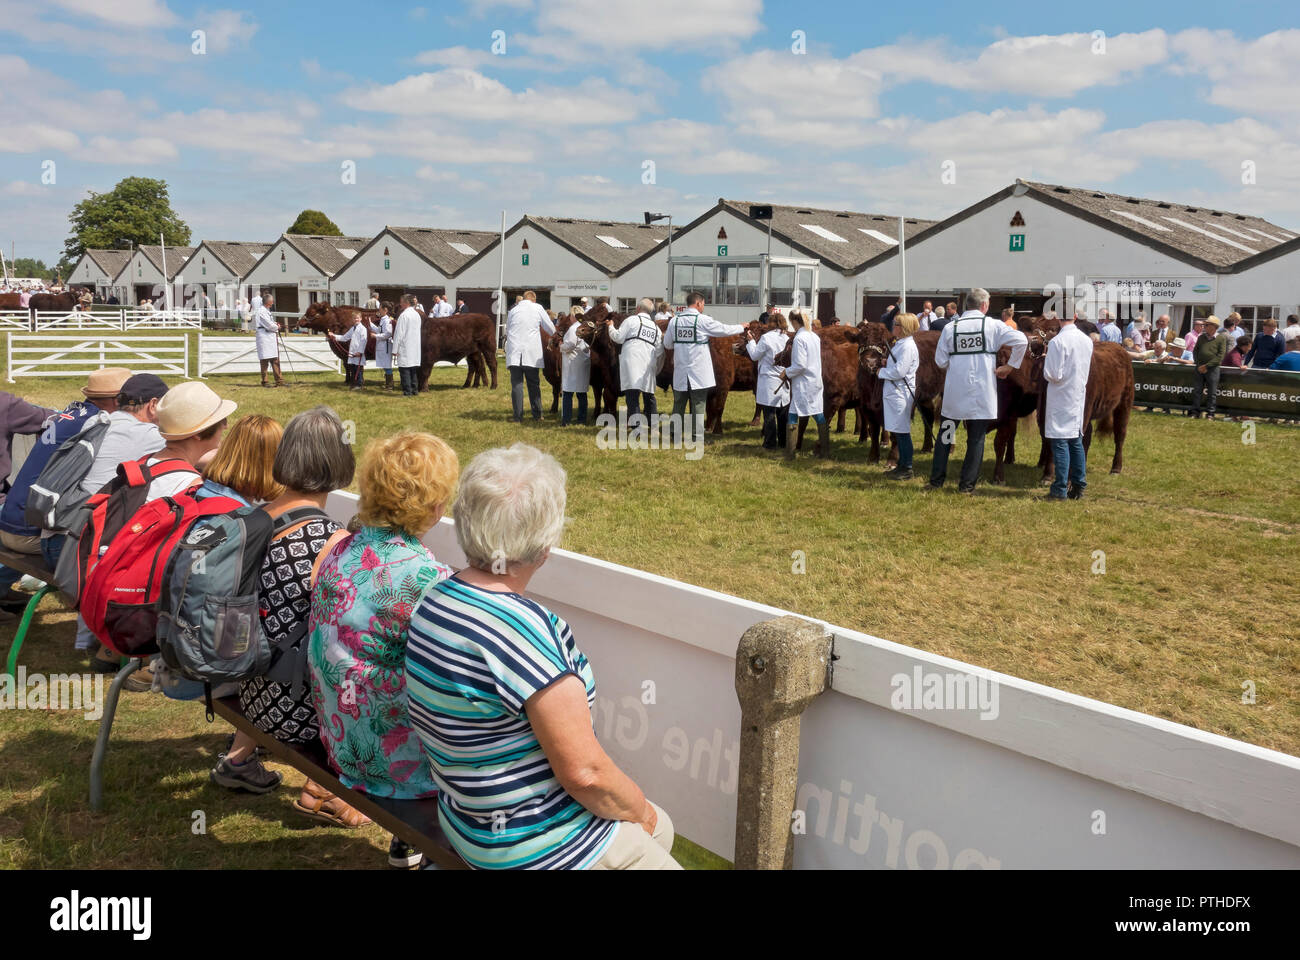 People ladies women watching cattle judging at the Great Yorkshire Show in summer Harrogate North Yorkshire England UK United Kingdom GB Great Britain Stock Photo